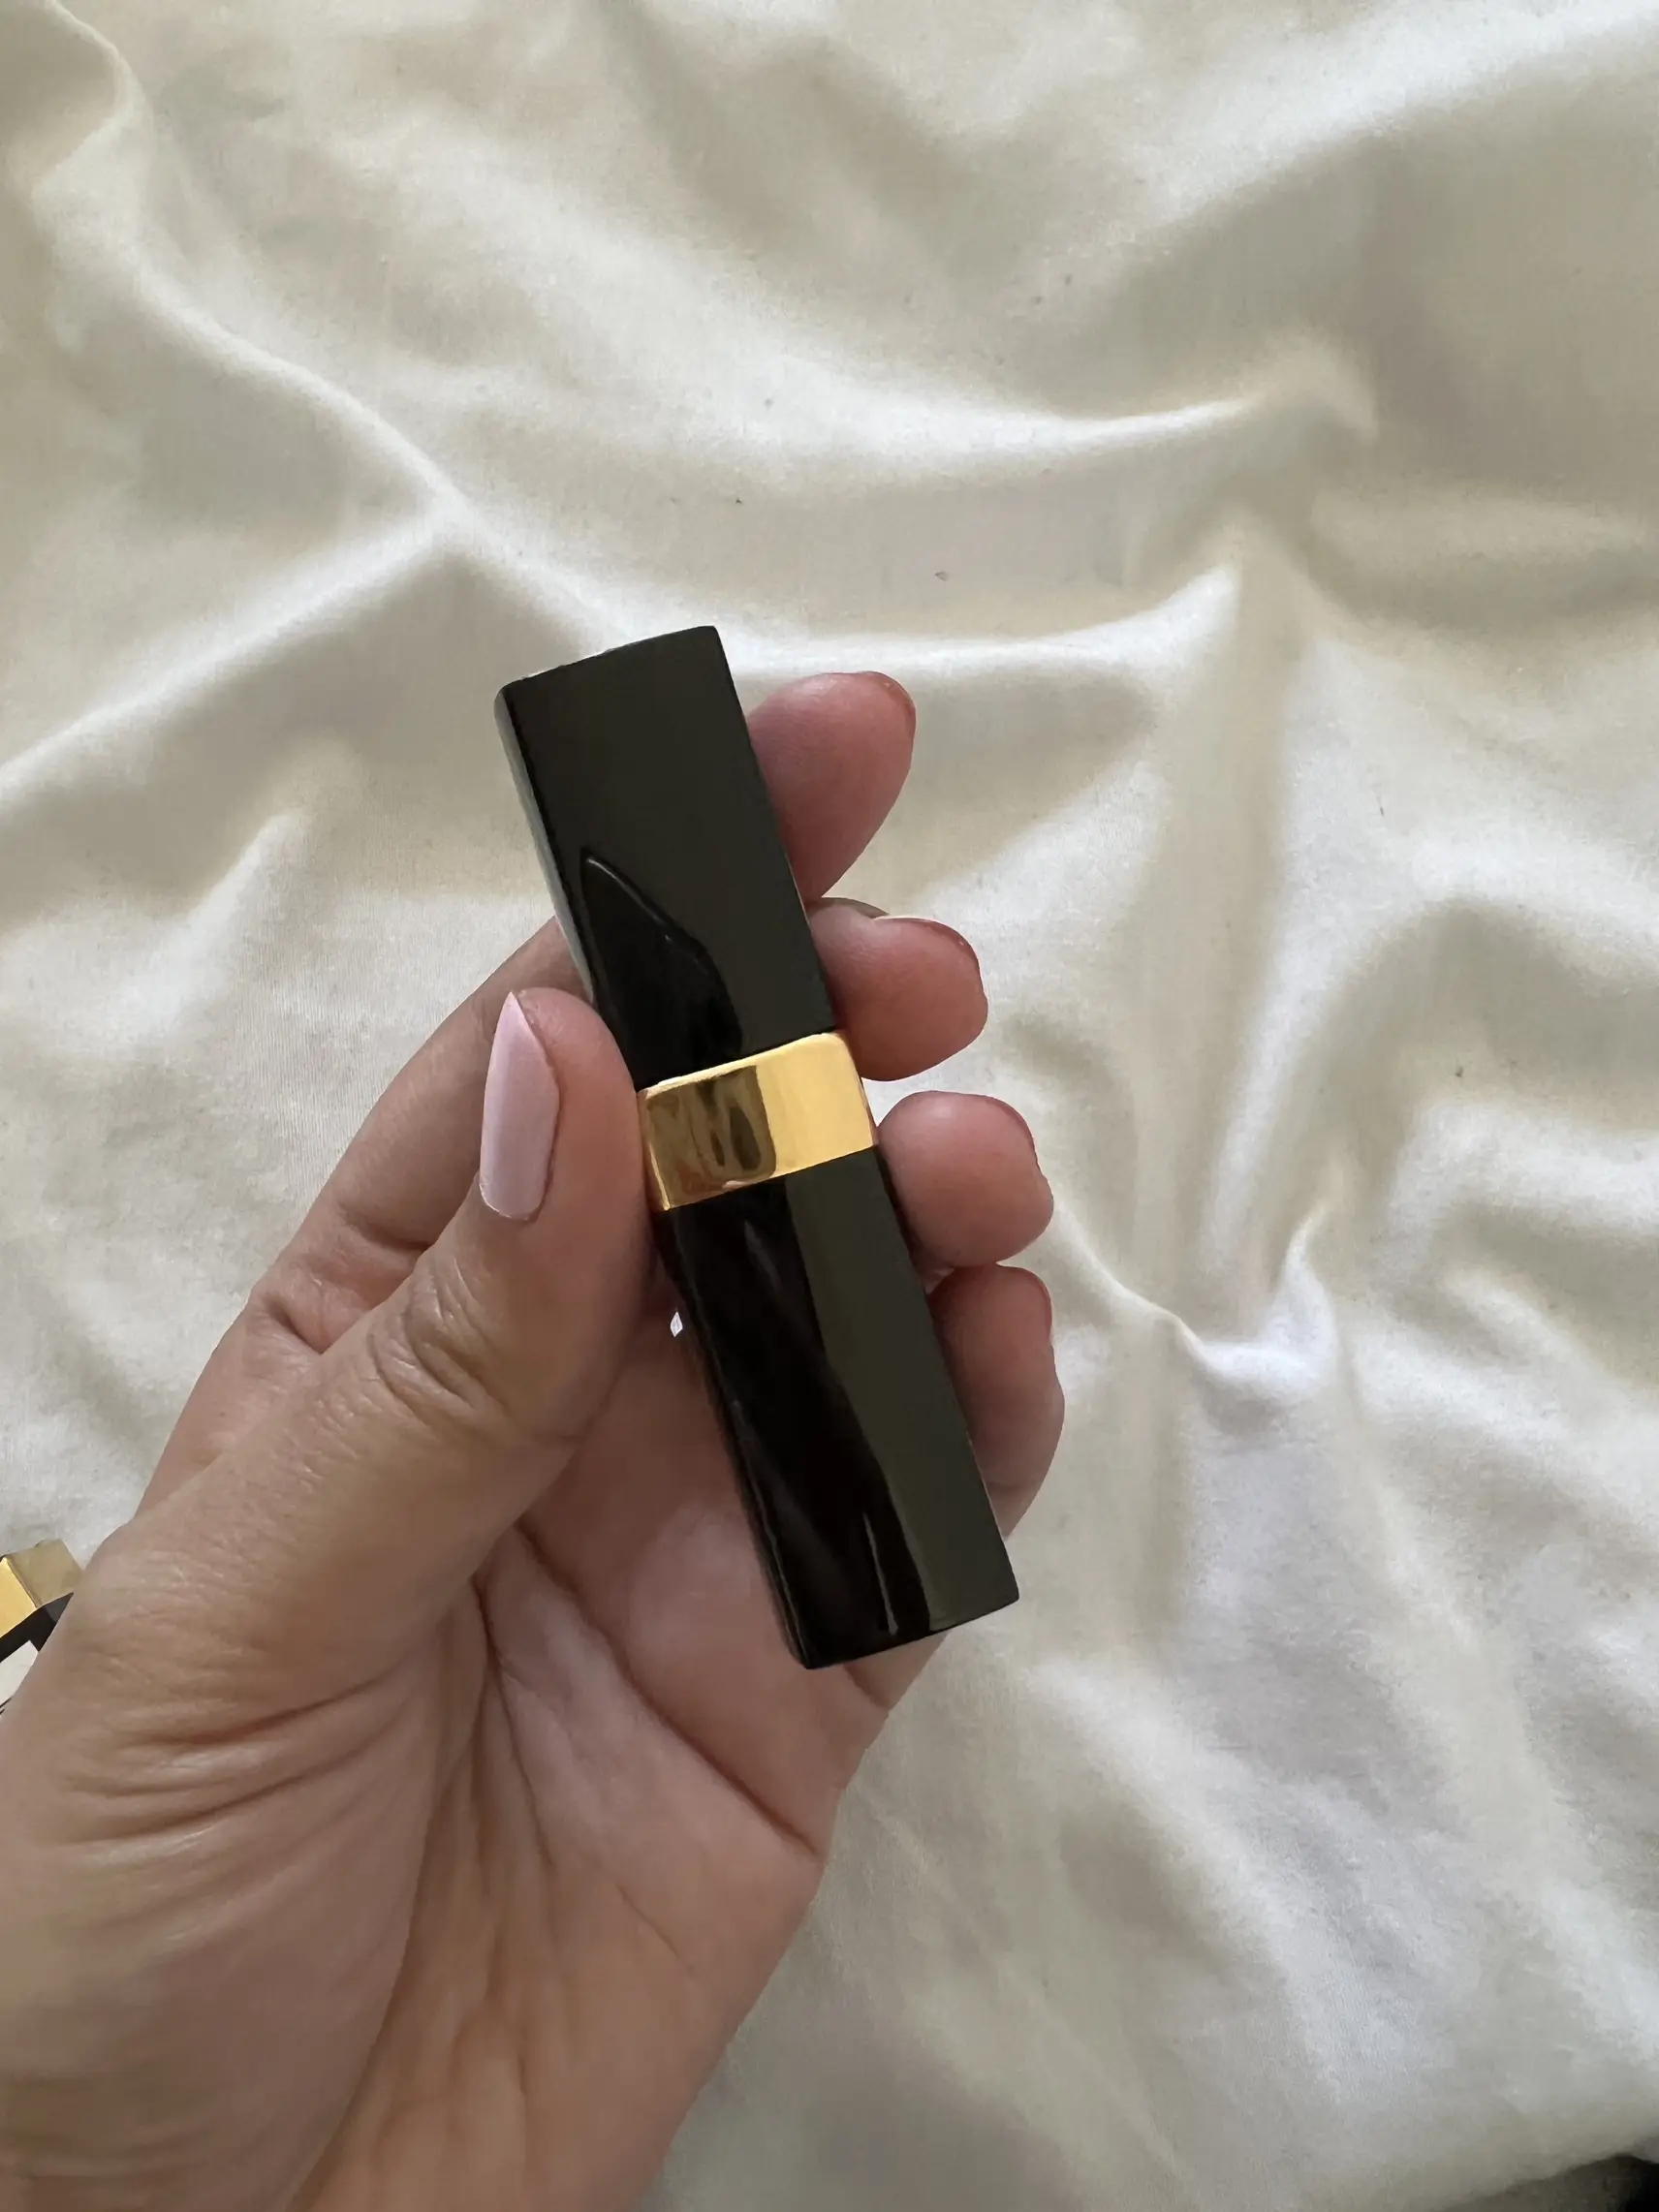 Chanel Rouge Coco Flash Lipstick, Gallery posted by Syasya Adlina